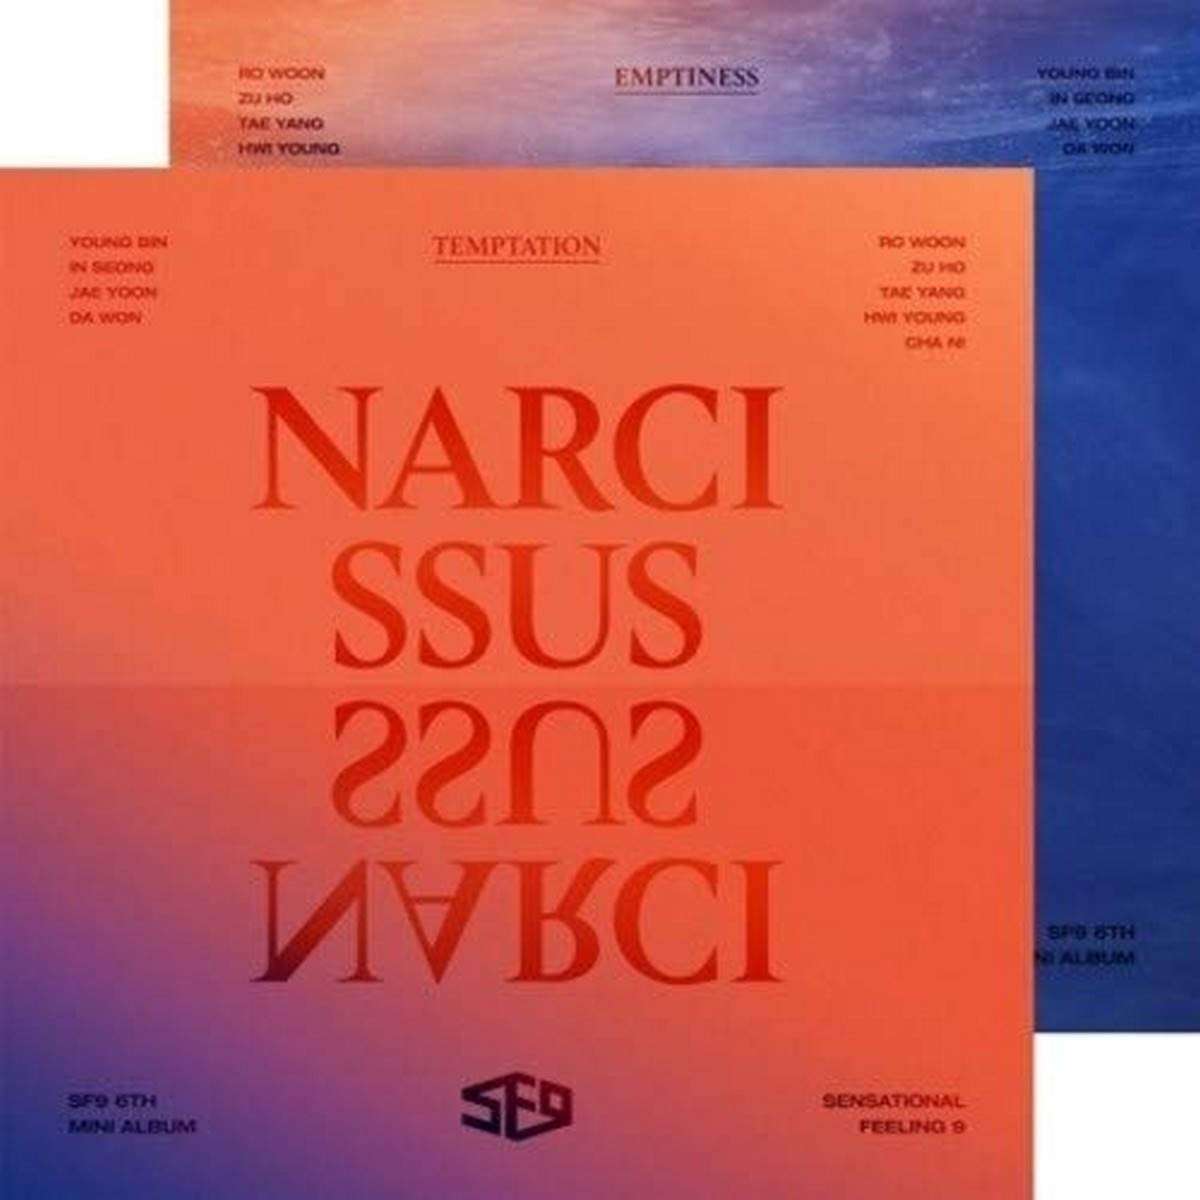 SF9 Narcissus